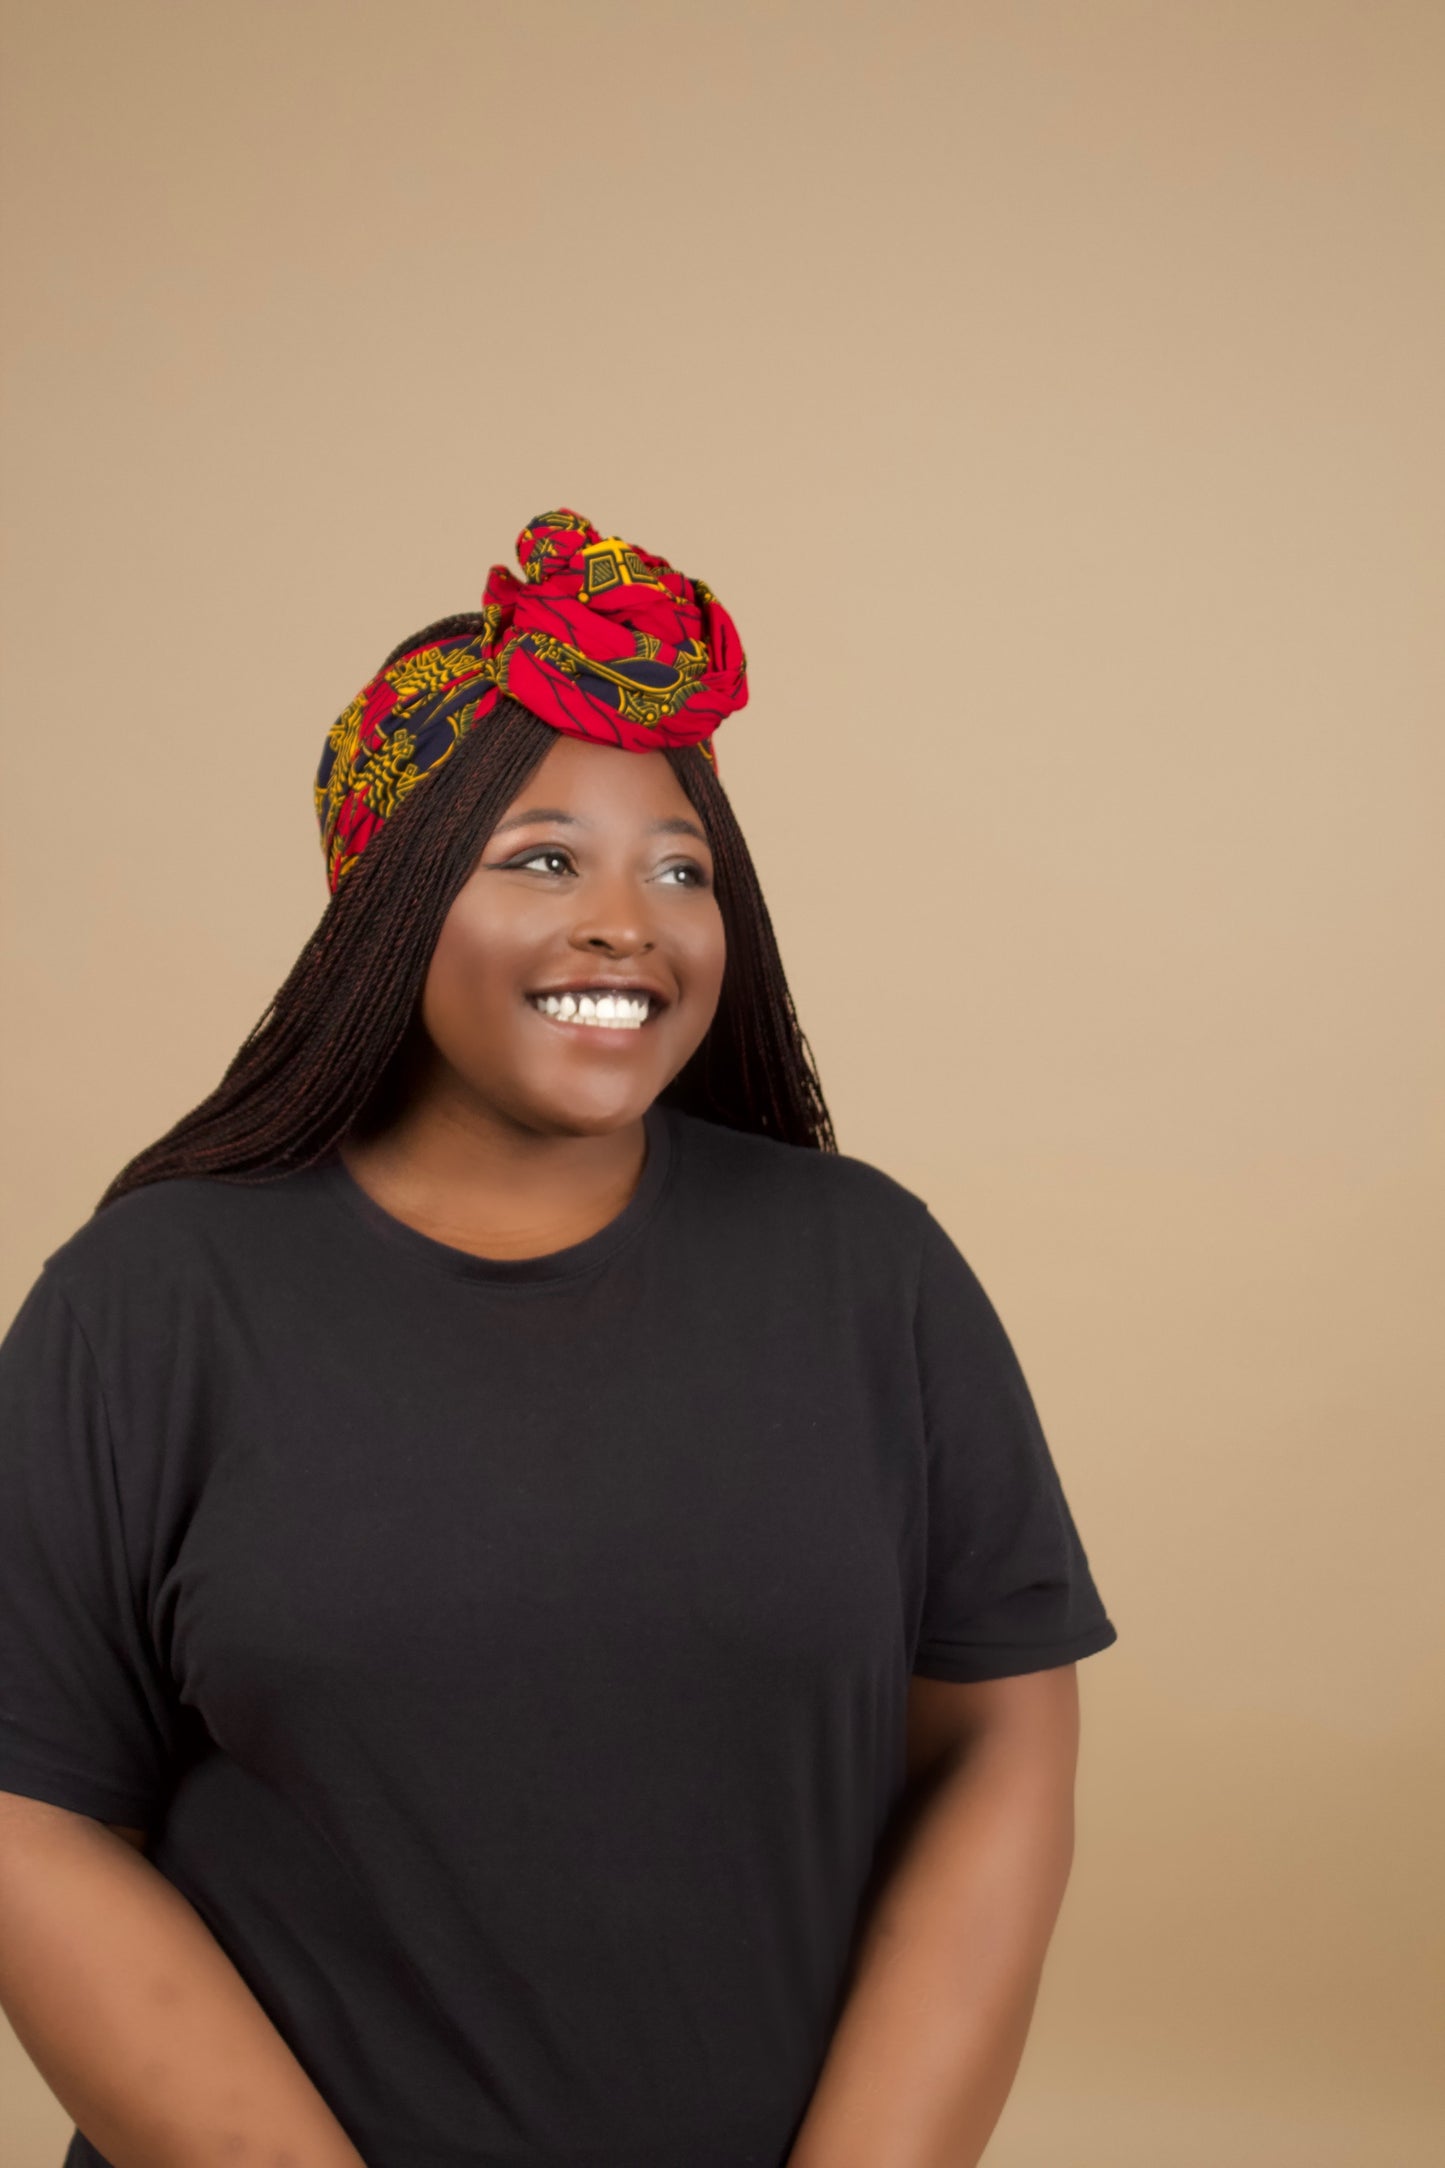 The Jalingo African Print Ankara Head Wrap is a lightweight African Print hair accessory made from ethically produced cotton. The Ankara wax print is a gorgeous red, yellow and black pattern. Designed in England Made in Nigeria.